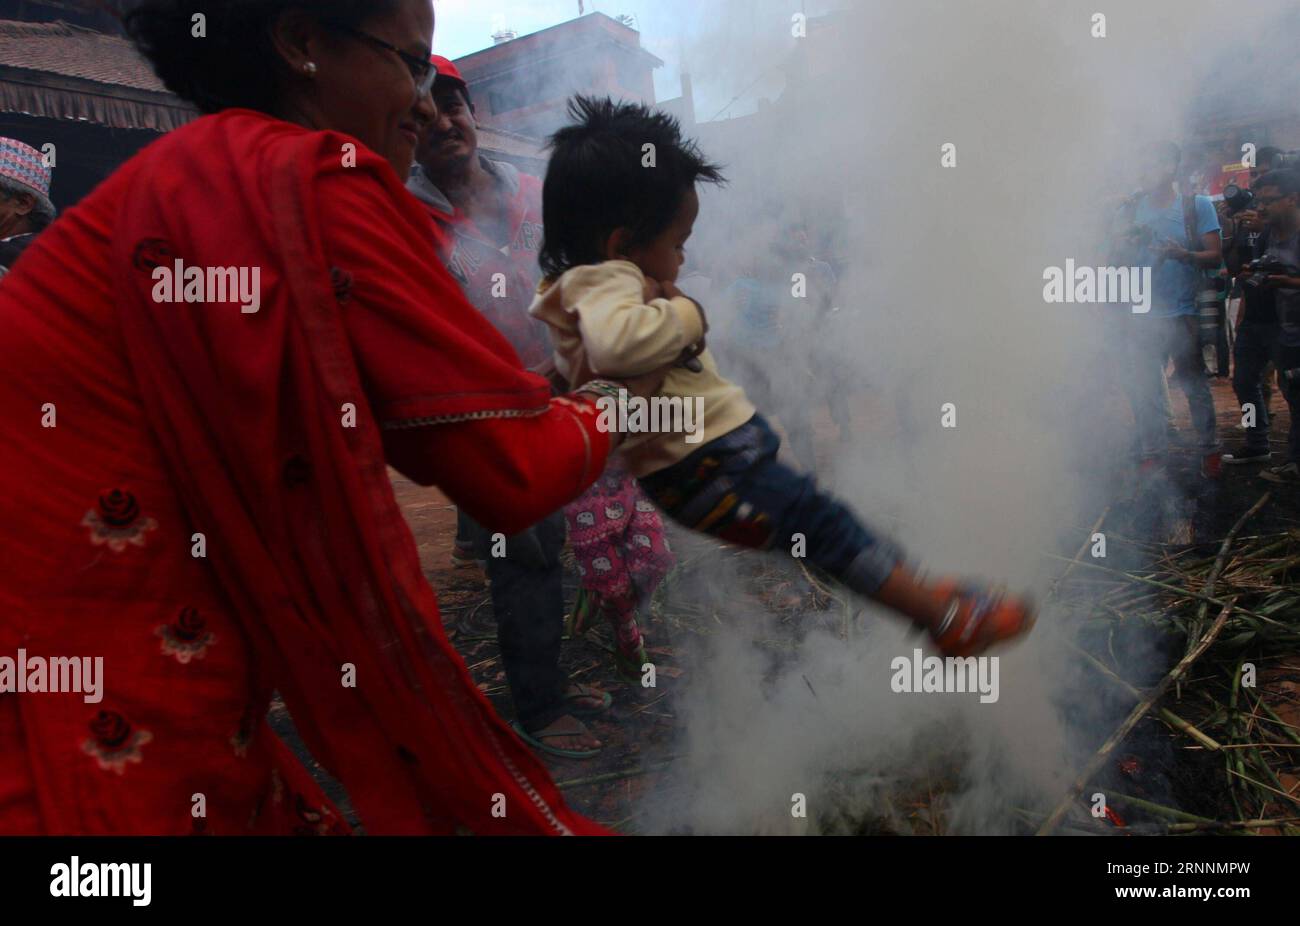 (170721) -- BHAKTAPUR, July 21, 2017 -- A woman carries her child above the fire after burning the dummy of Demon Ghantakarna in belief of removing evil spirits during the Ghantakarna Festival at Bhaktapur, Nepal, July 21, 2017. The Newar community of the Kathmandu Valley observe Ghantakarna, a festival to chase away evil spirits and usher in good fortune. People wear metal rings to safeguard against all ills and evil spirits. ) (dtf) NEPAL-BHAKTAPUR-GHANTAKARNA FESTIVAL sunilxsharma PUBLICATIONxNOTxINxCHN   Bhaktapur July 21 2017 a Woman carries her Child above The Fire After Burning The Dumm Stock Photo